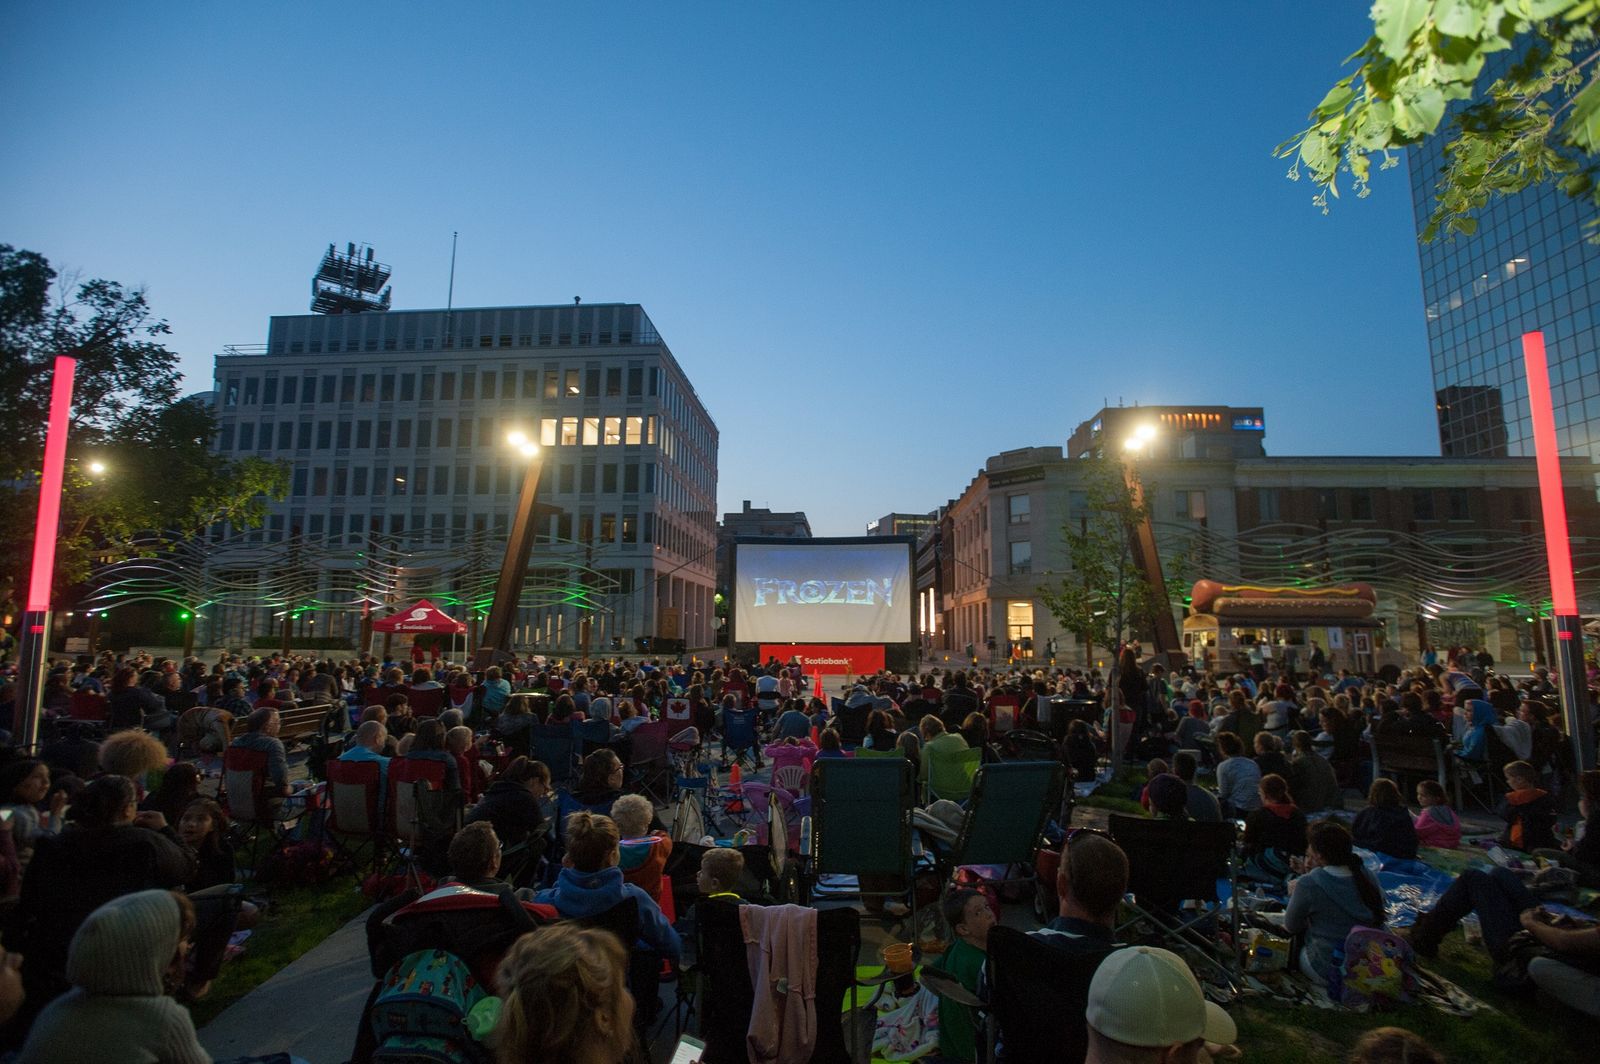 Bring your family to Victoria Park to enjoy one of this summer's many Regina tourism events, including Cinema Under the Stars. <a href="https://reginadowntown.ca/">Photo courtesy of Downtown Regina.</a>